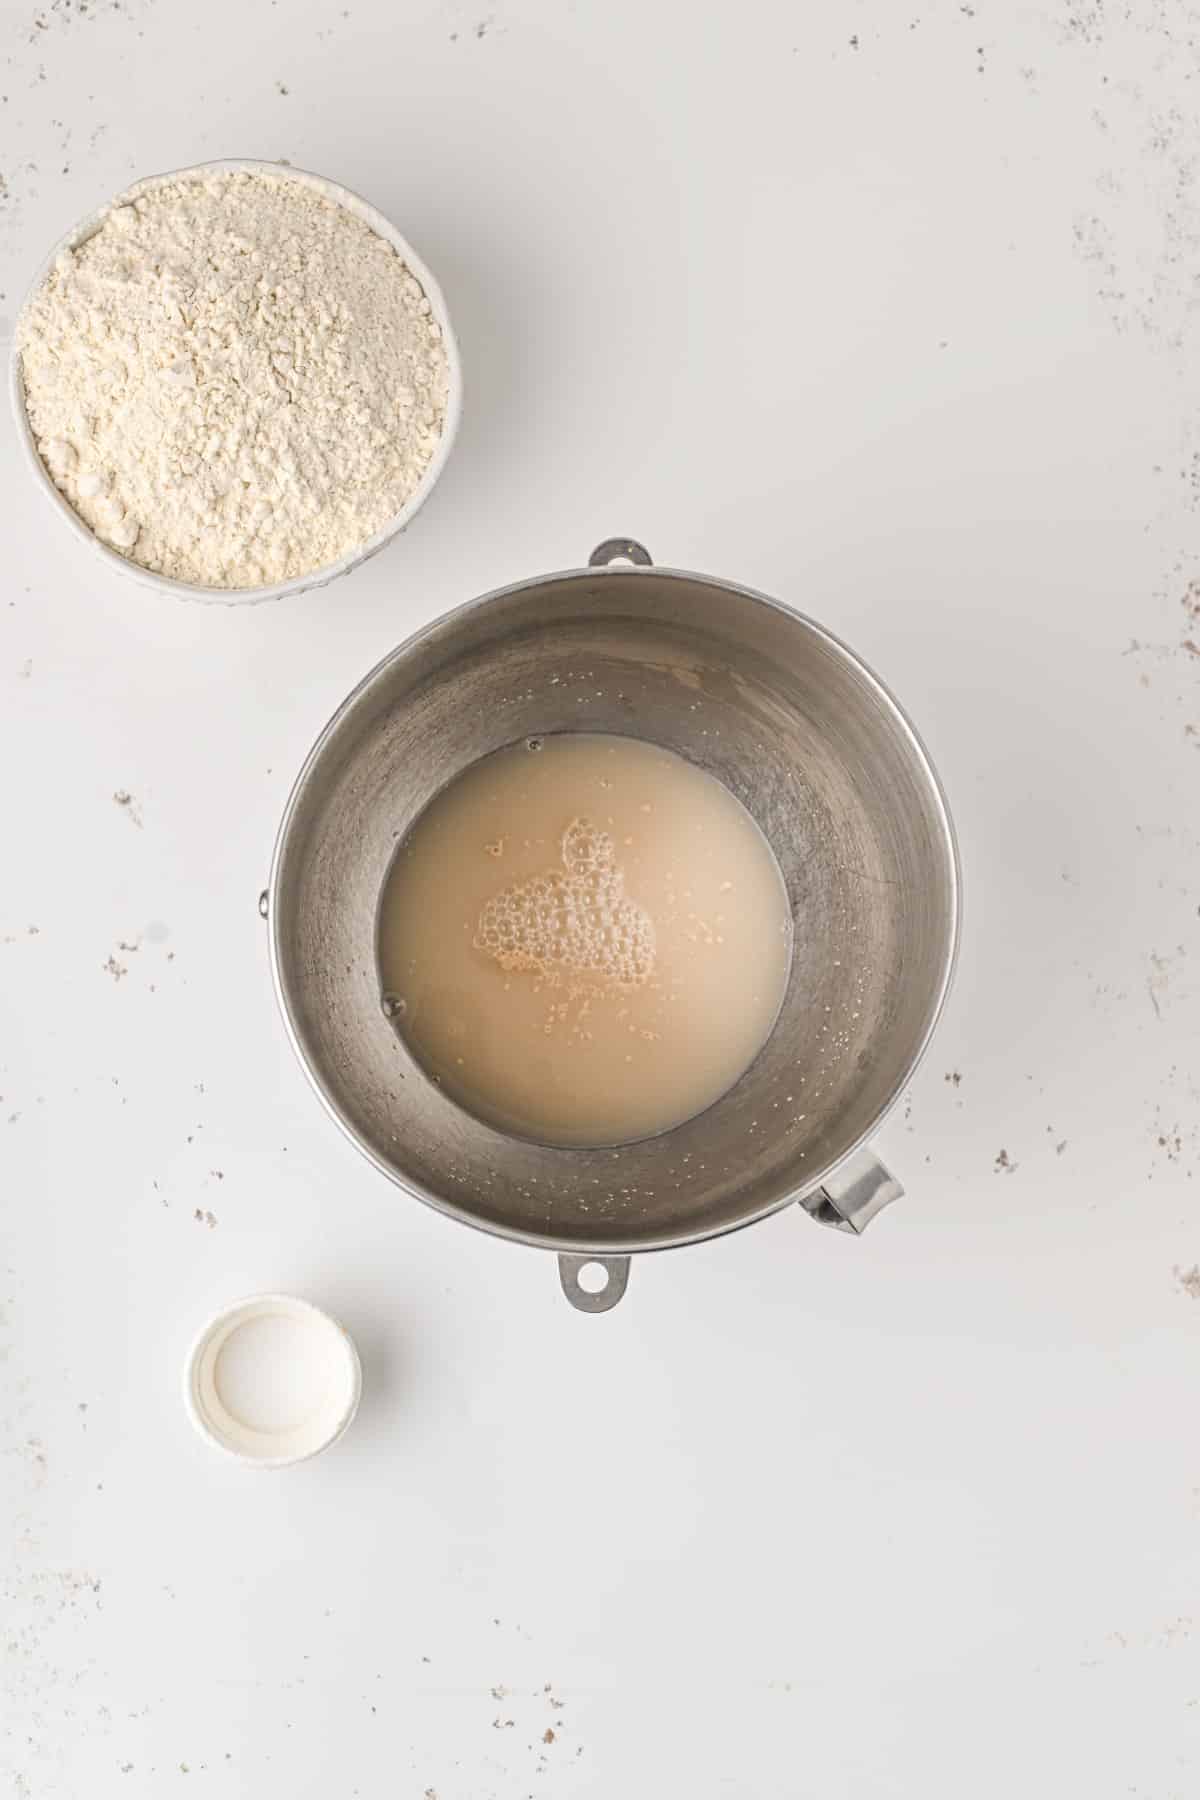 Yeast, water and sugar in a bowl. 